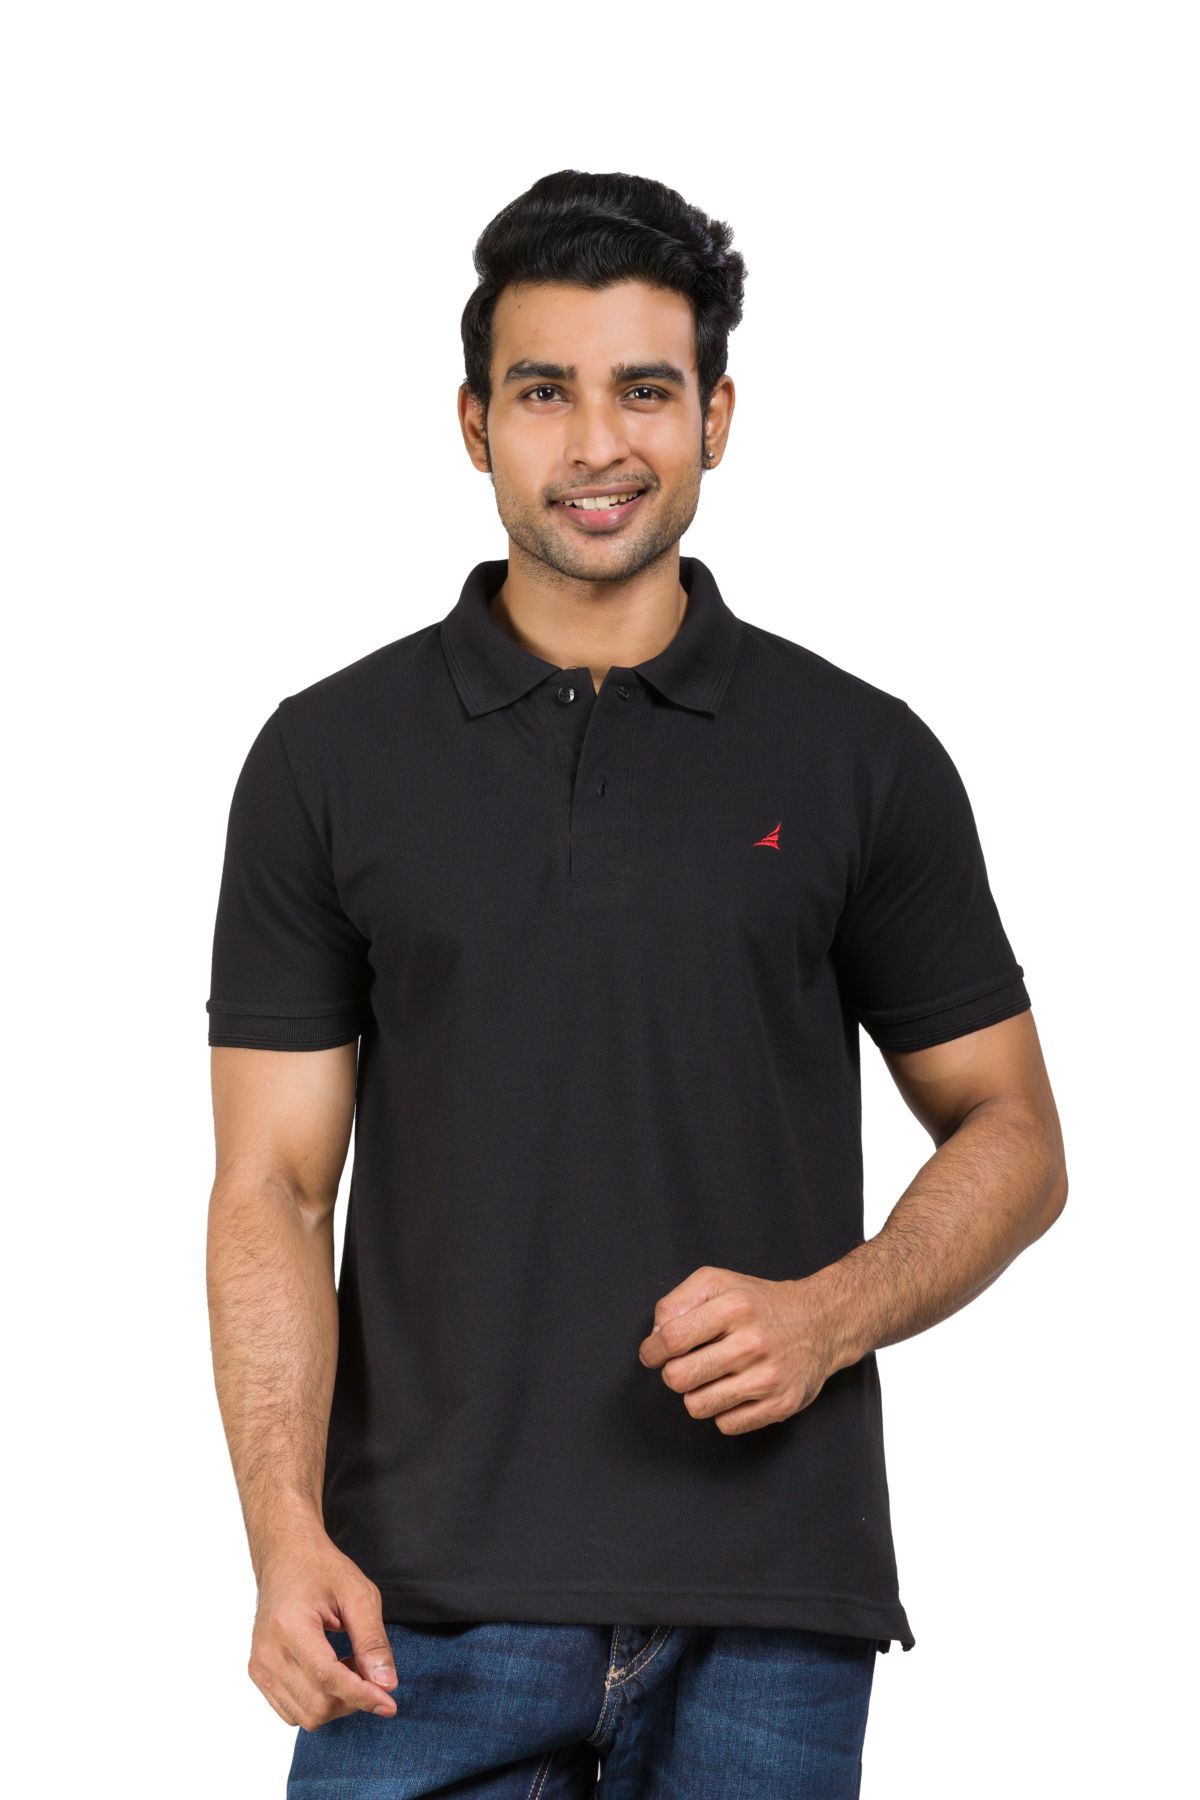 Regular Fit Half Sleeve Black Polo is made of comfortable, cotton blend pique fabric. Suitable for office or for any casual day.